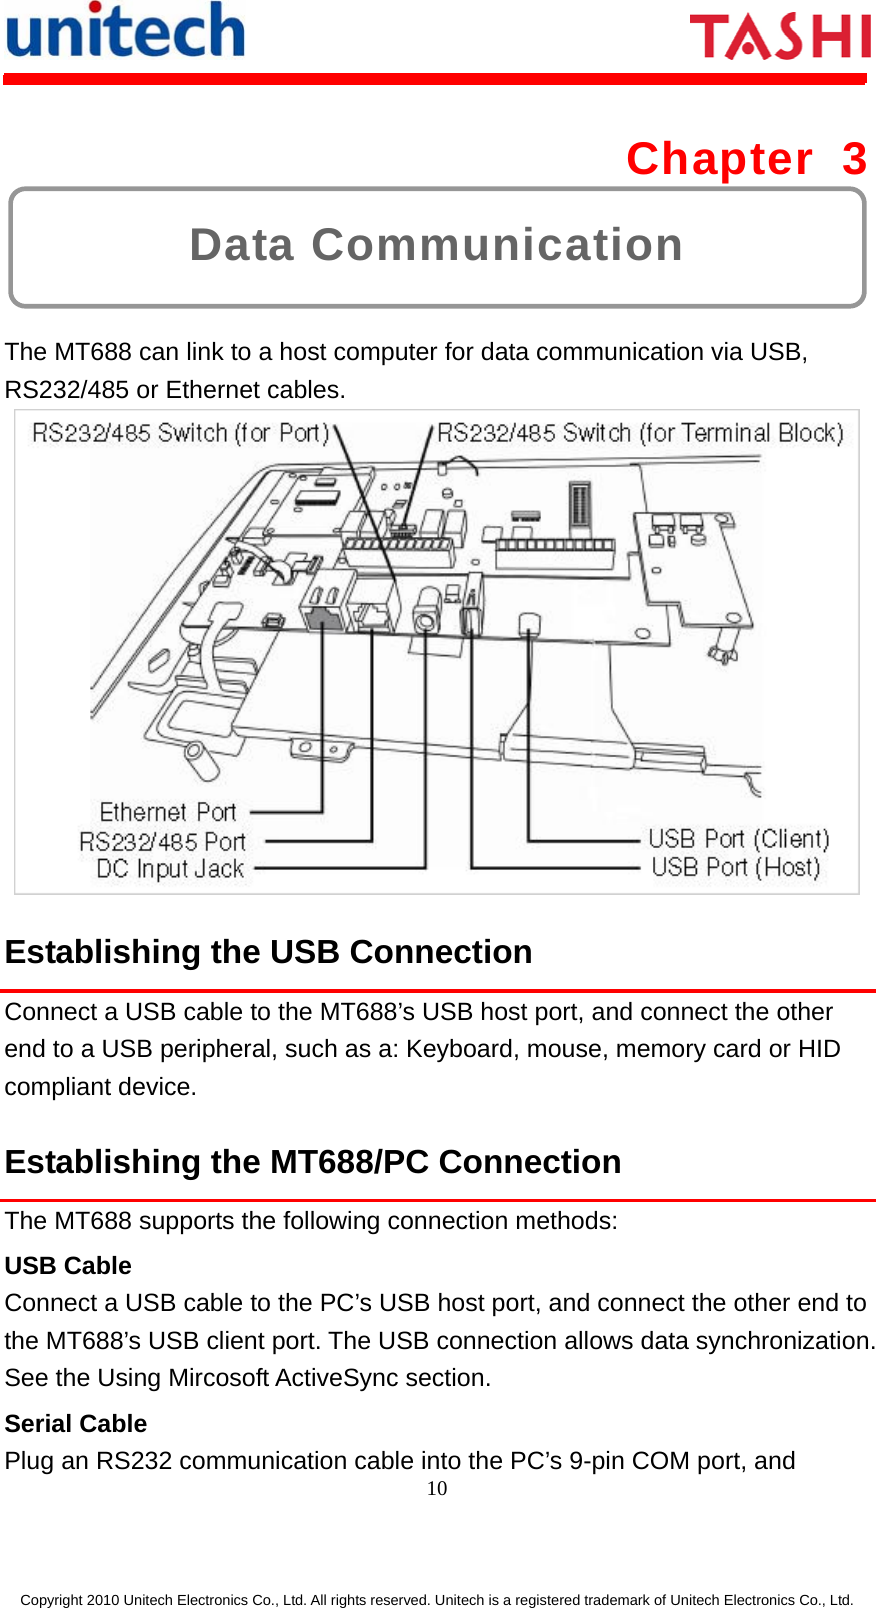      10  Copyright 2010 Unitech Electronics Co., Ltd. All rights reserved. Unitech is a registered trademark of Unitech Electronics Co., Ltd. Data Communication Chapter 3  The MT688 can link to a host computer for data communication via USB, RS232/485 or Ethernet cables.    Establishing the USB Connection Connect a USB cable to the MT688’s USB host port, and connect the other end to a USB peripheral, such as a: Keyboard, mouse, memory card or HID compliant device. Establishing the MT688/PC Connection The MT688 supports the following connection methods: USB Cable Connect a USB cable to the PC’s USB host port, and connect the other end to the MT688’s USB client port. The USB connection allows data synchronization. See the Using Mircosoft ActiveSync section. Serial Cable Plug an RS232 communication cable into the PC’s 9-pin COM port, and 